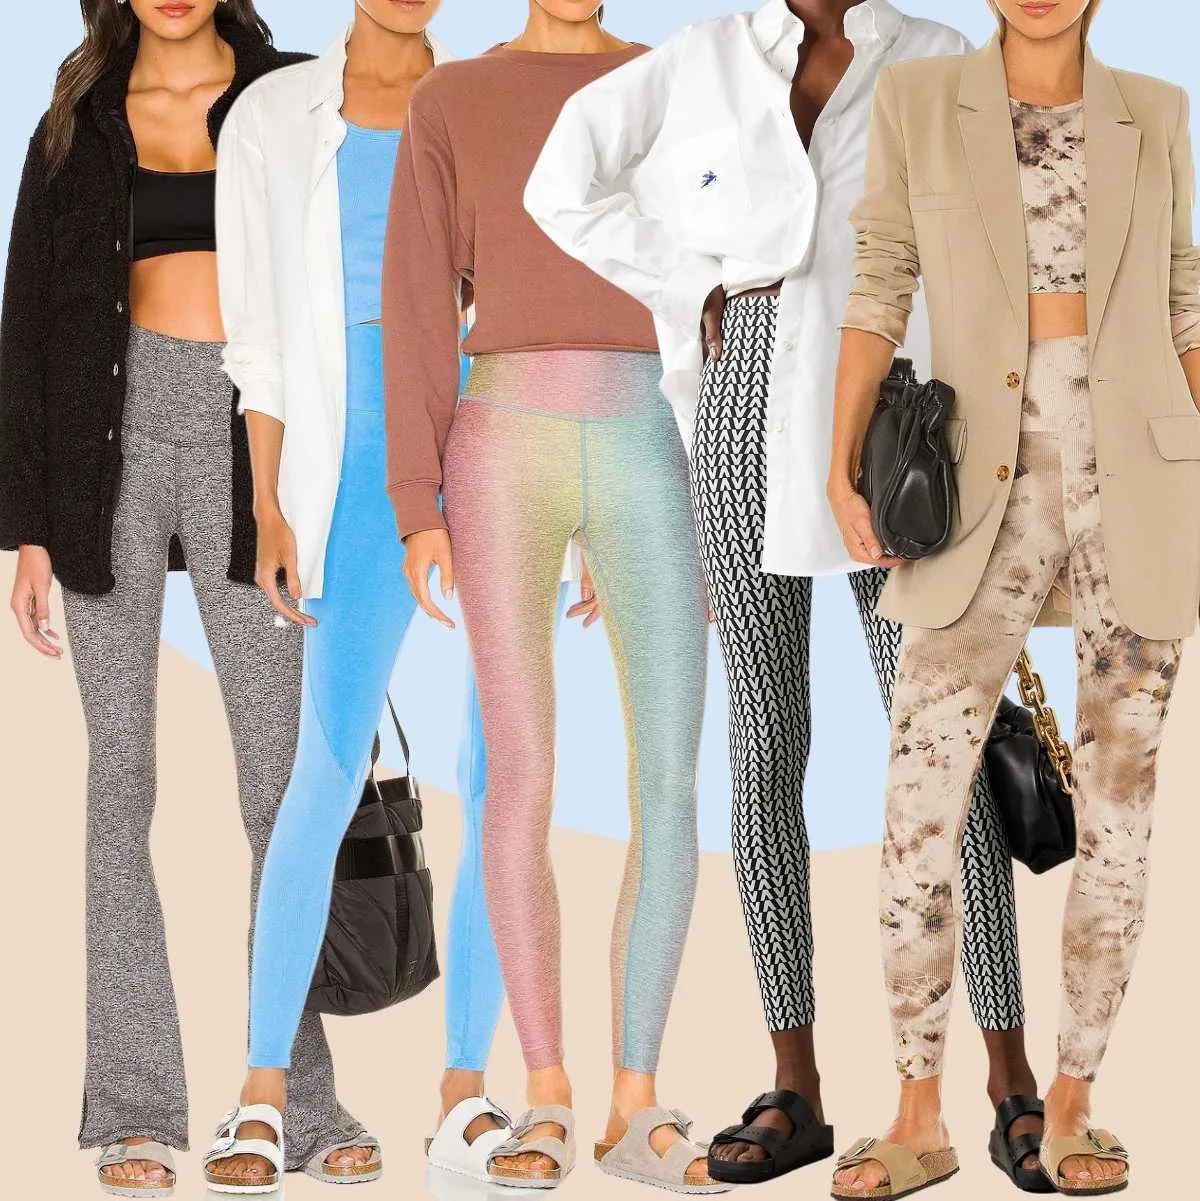 Collage of 5 women wearing different Birkenstock outfits with leggings.